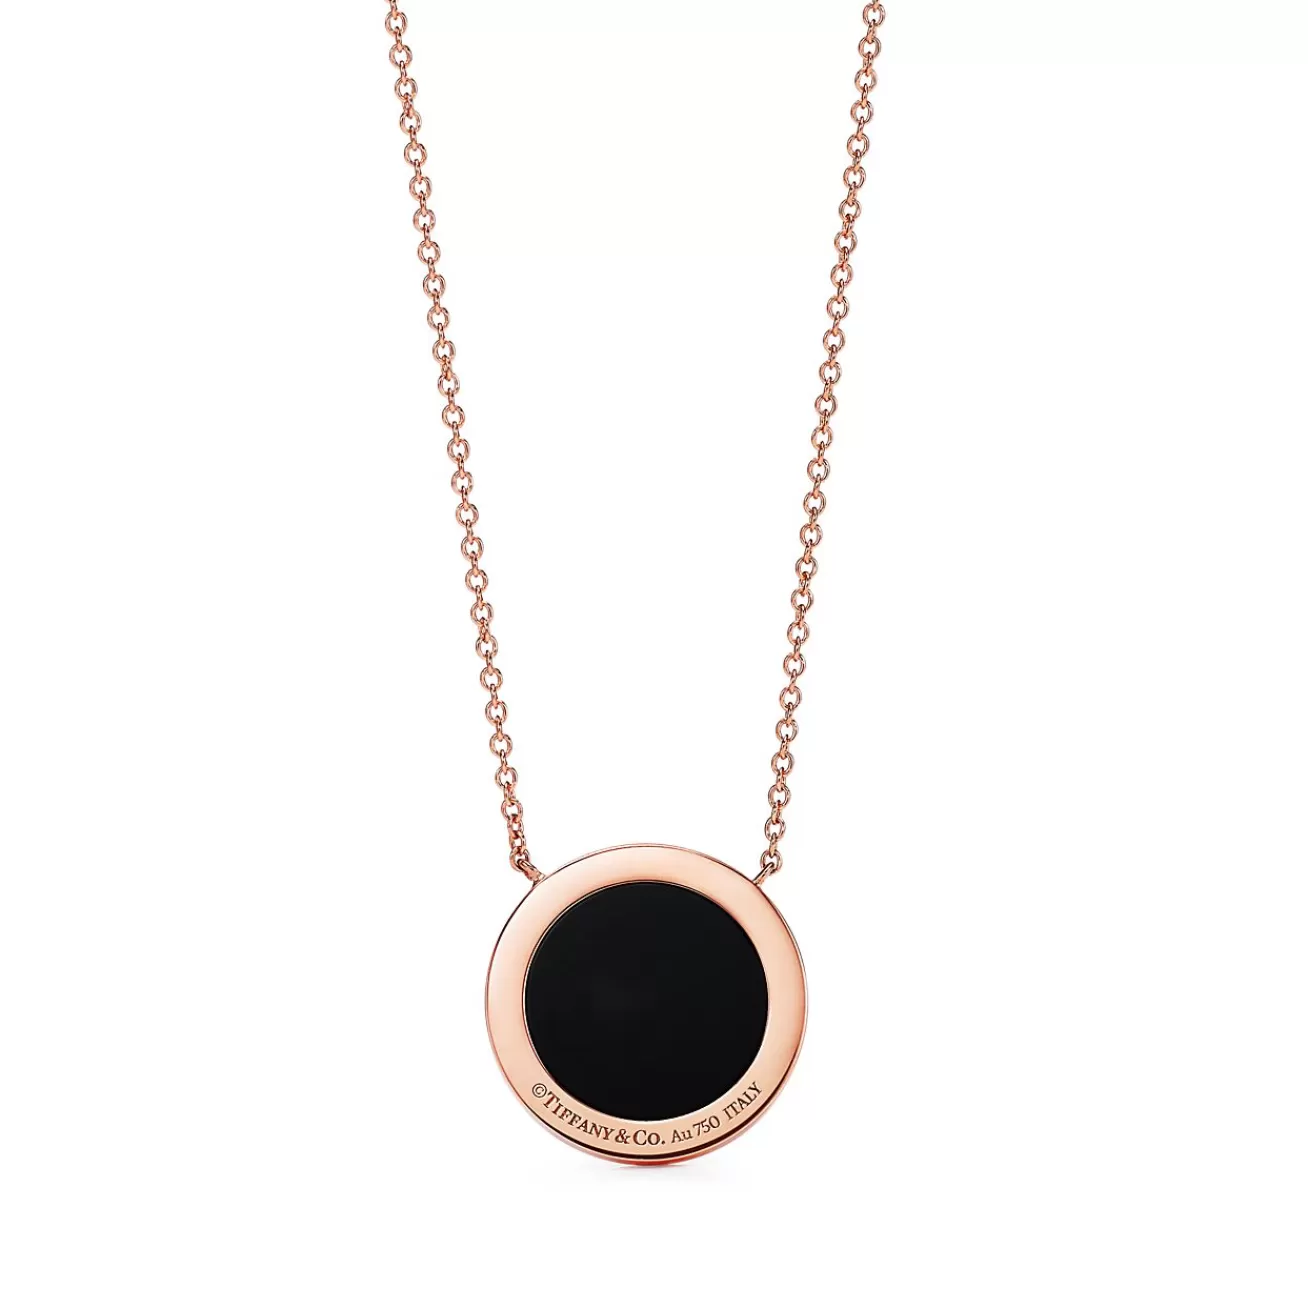 Tiffany & Co. Tiffany T diamond and black onyx circle pendant in 18k rose gold. | ^ Necklaces & Pendants | Men's Jewelry